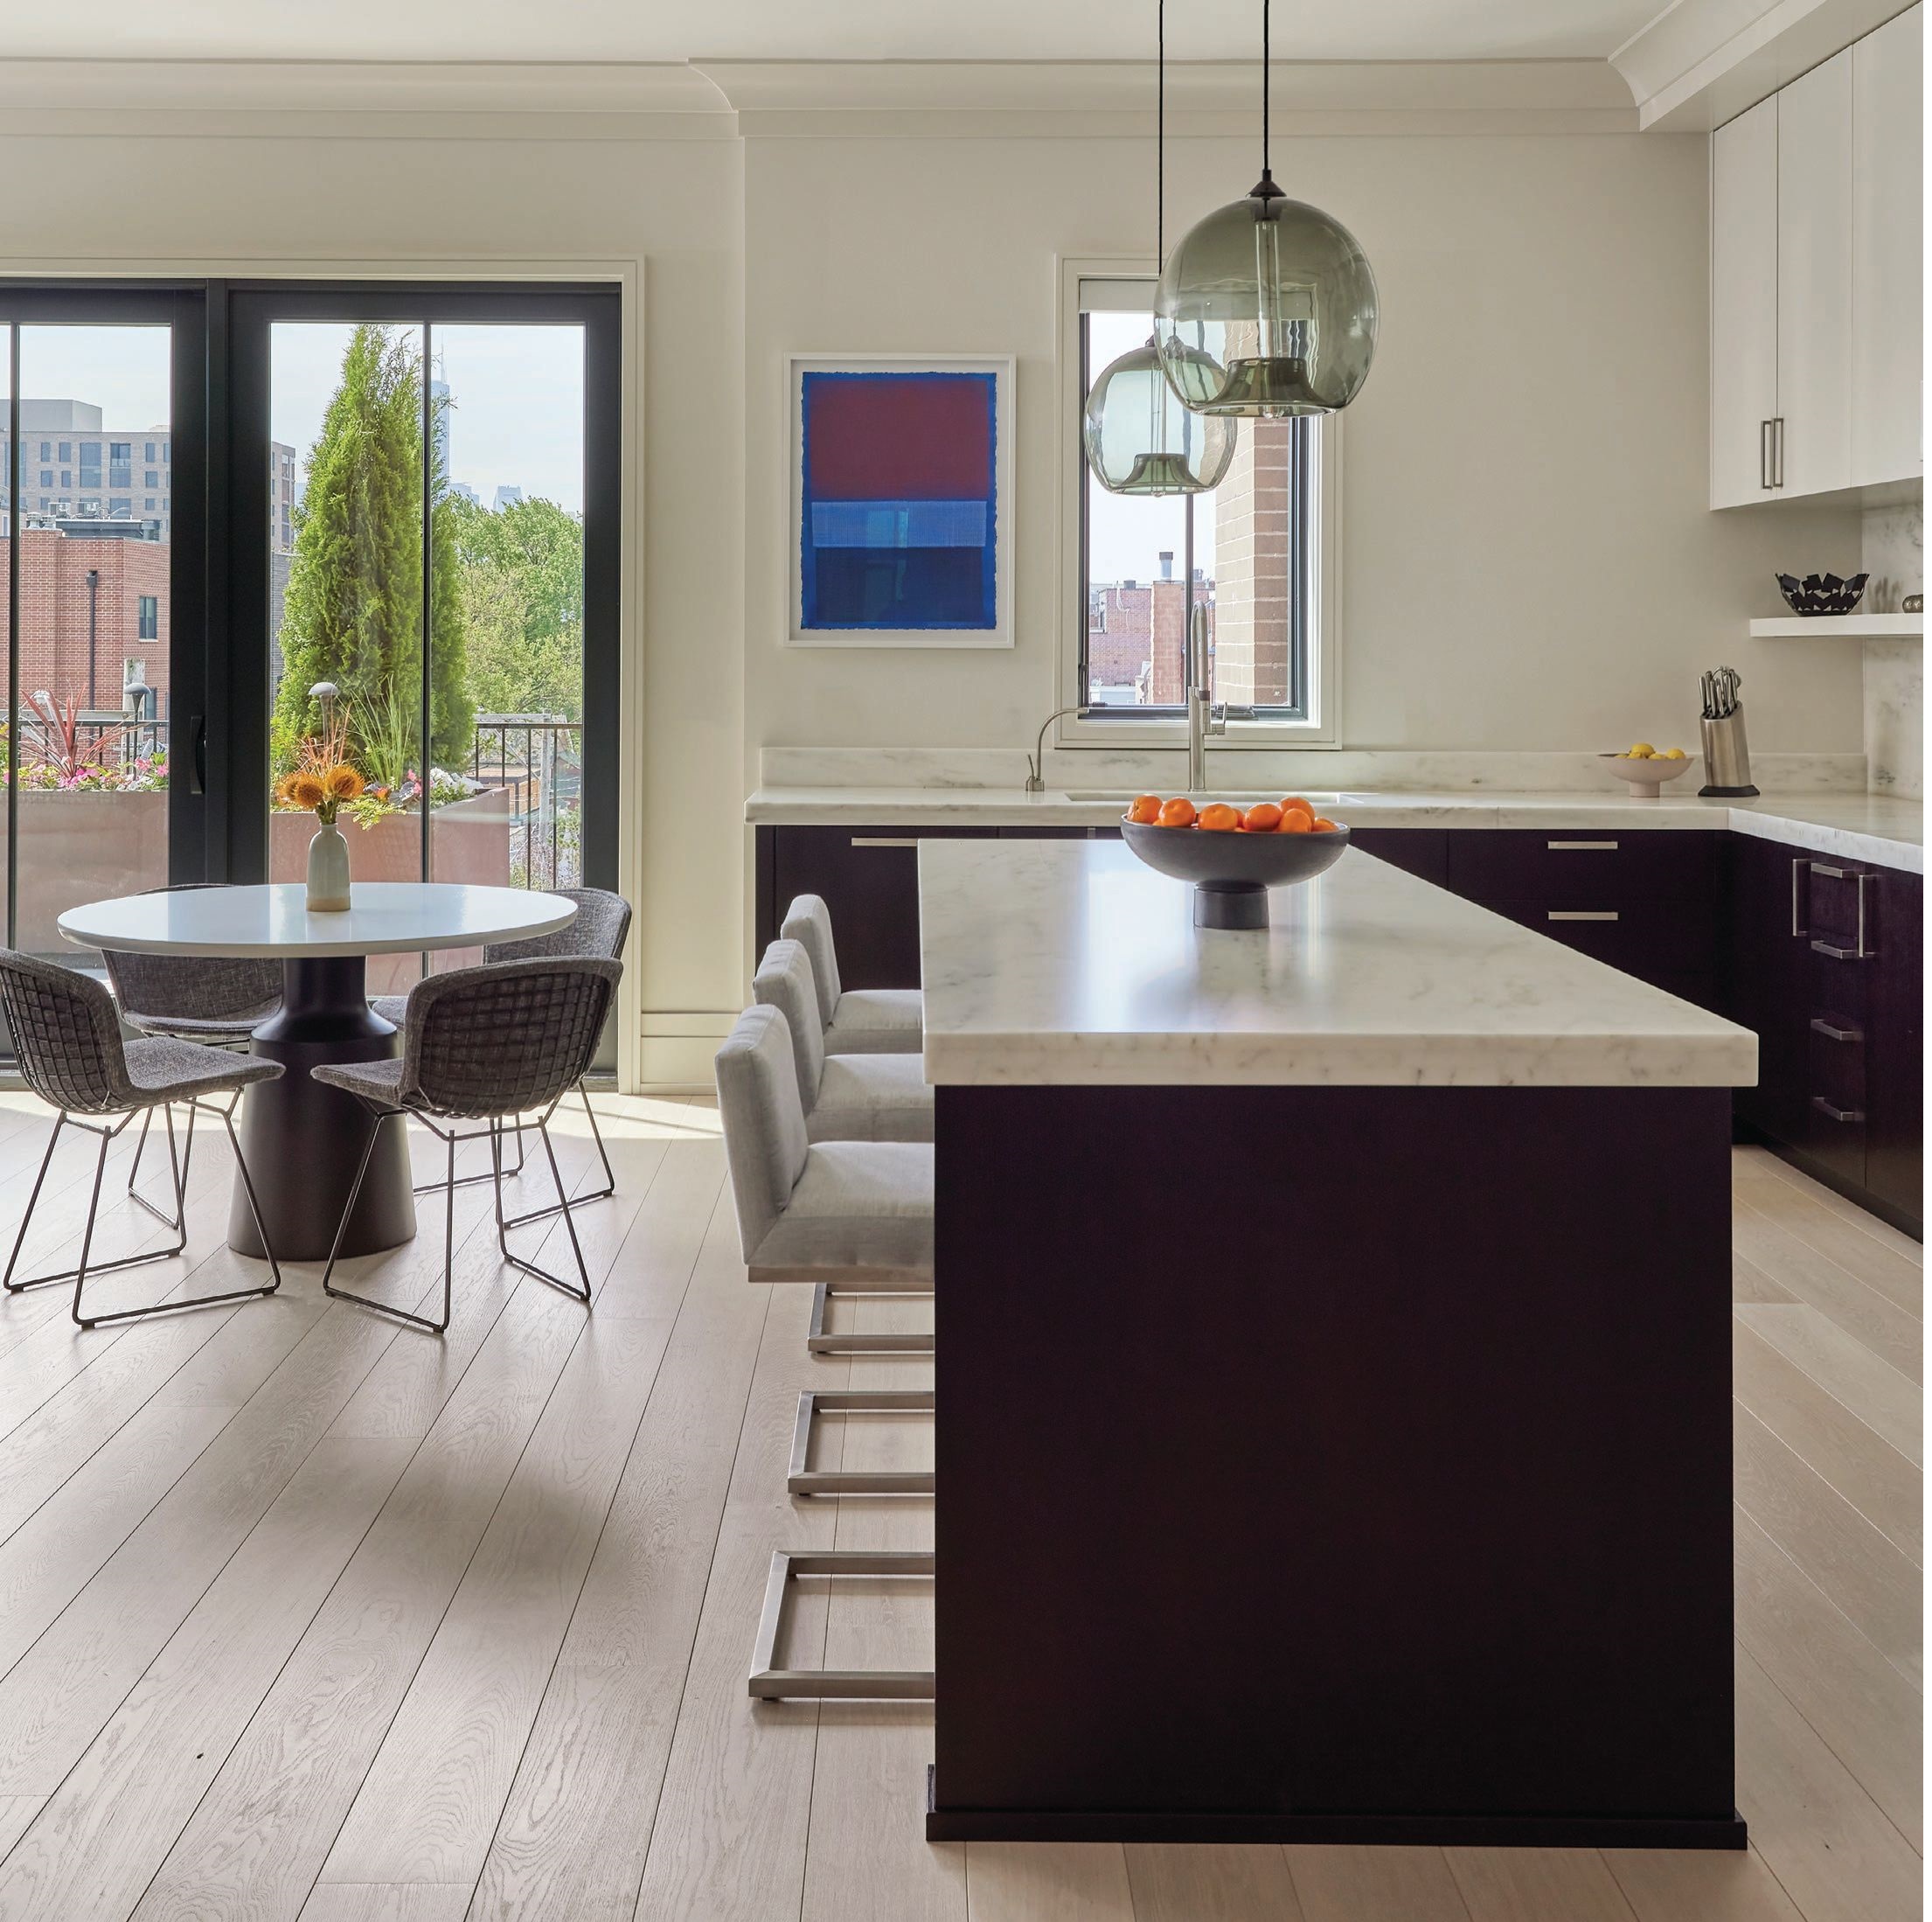 The light, airy kitchen beckons with a Holly Hunt Peso table and Knoll Bertoia chairs. Photographed by Mike Schwartz